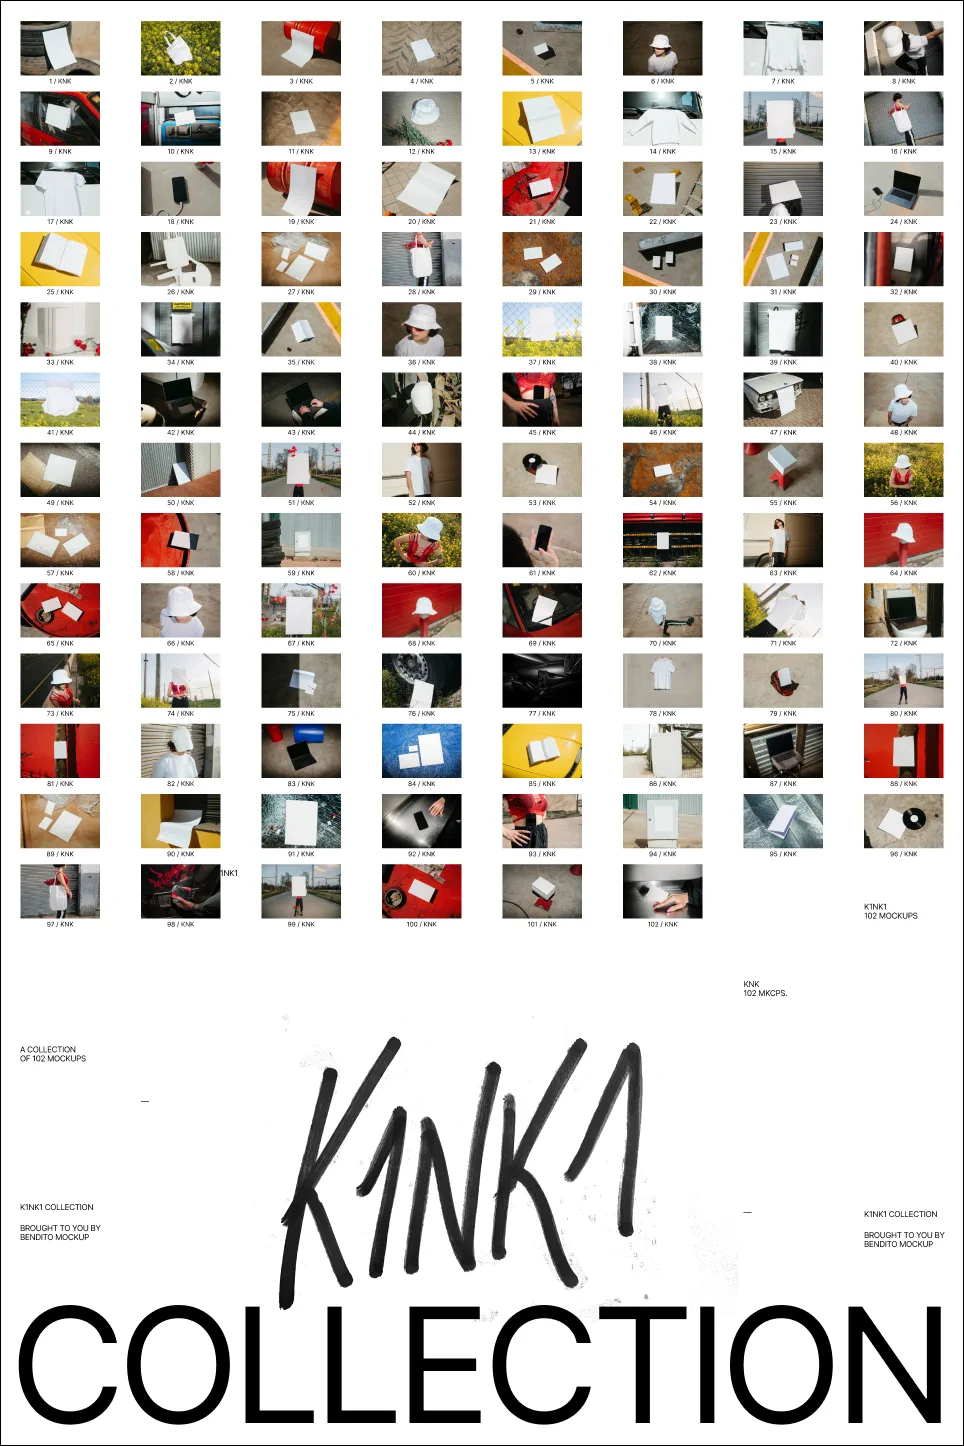 Masonry layout with the 102 mockups from K1NK1 Collection.